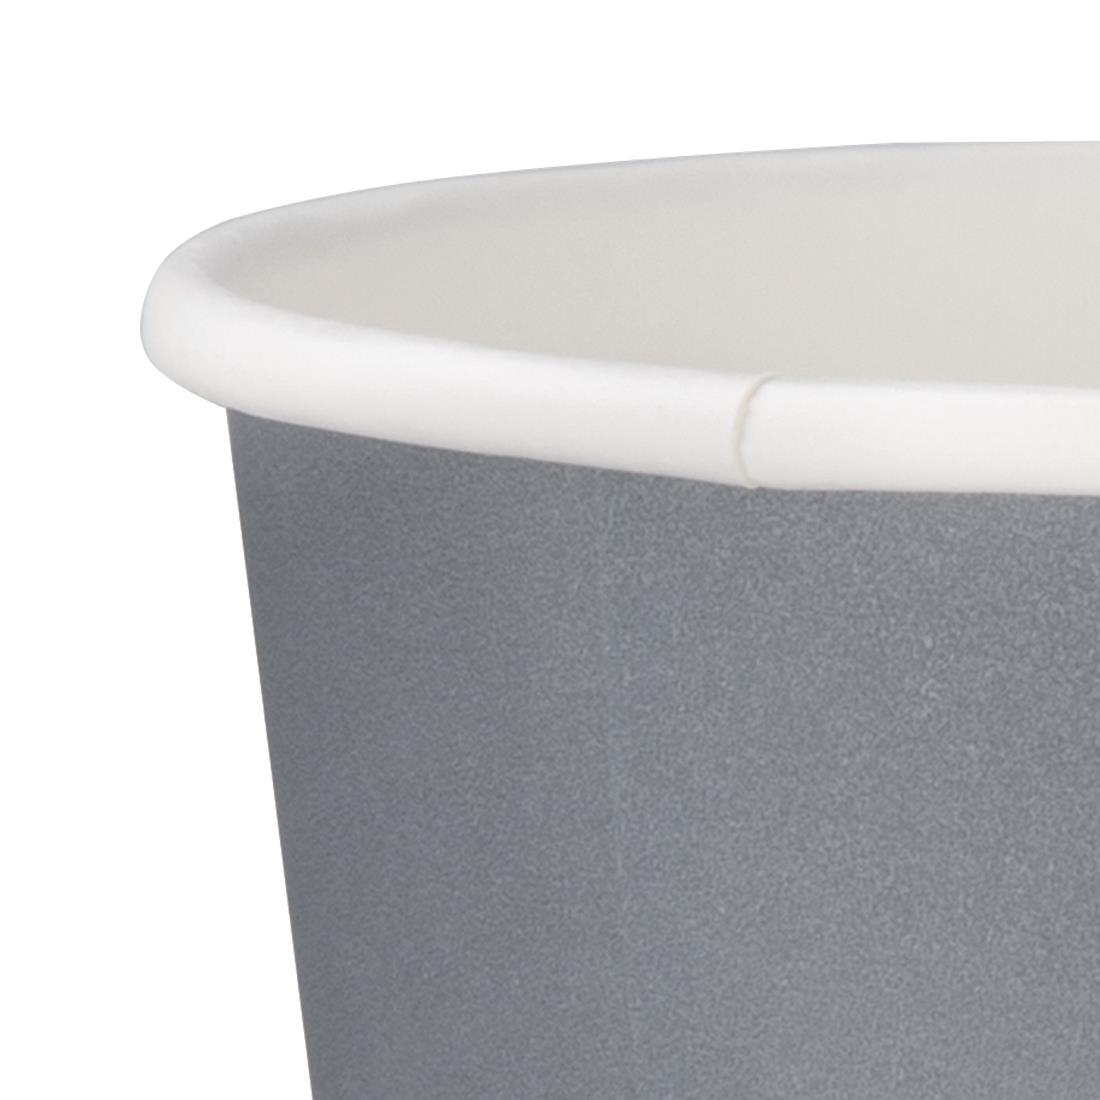 Fiesta Recyclable Coffee Cups Single Wall Charcoal 340ml / 12oz (Pack of 1000) - GP416  - 4